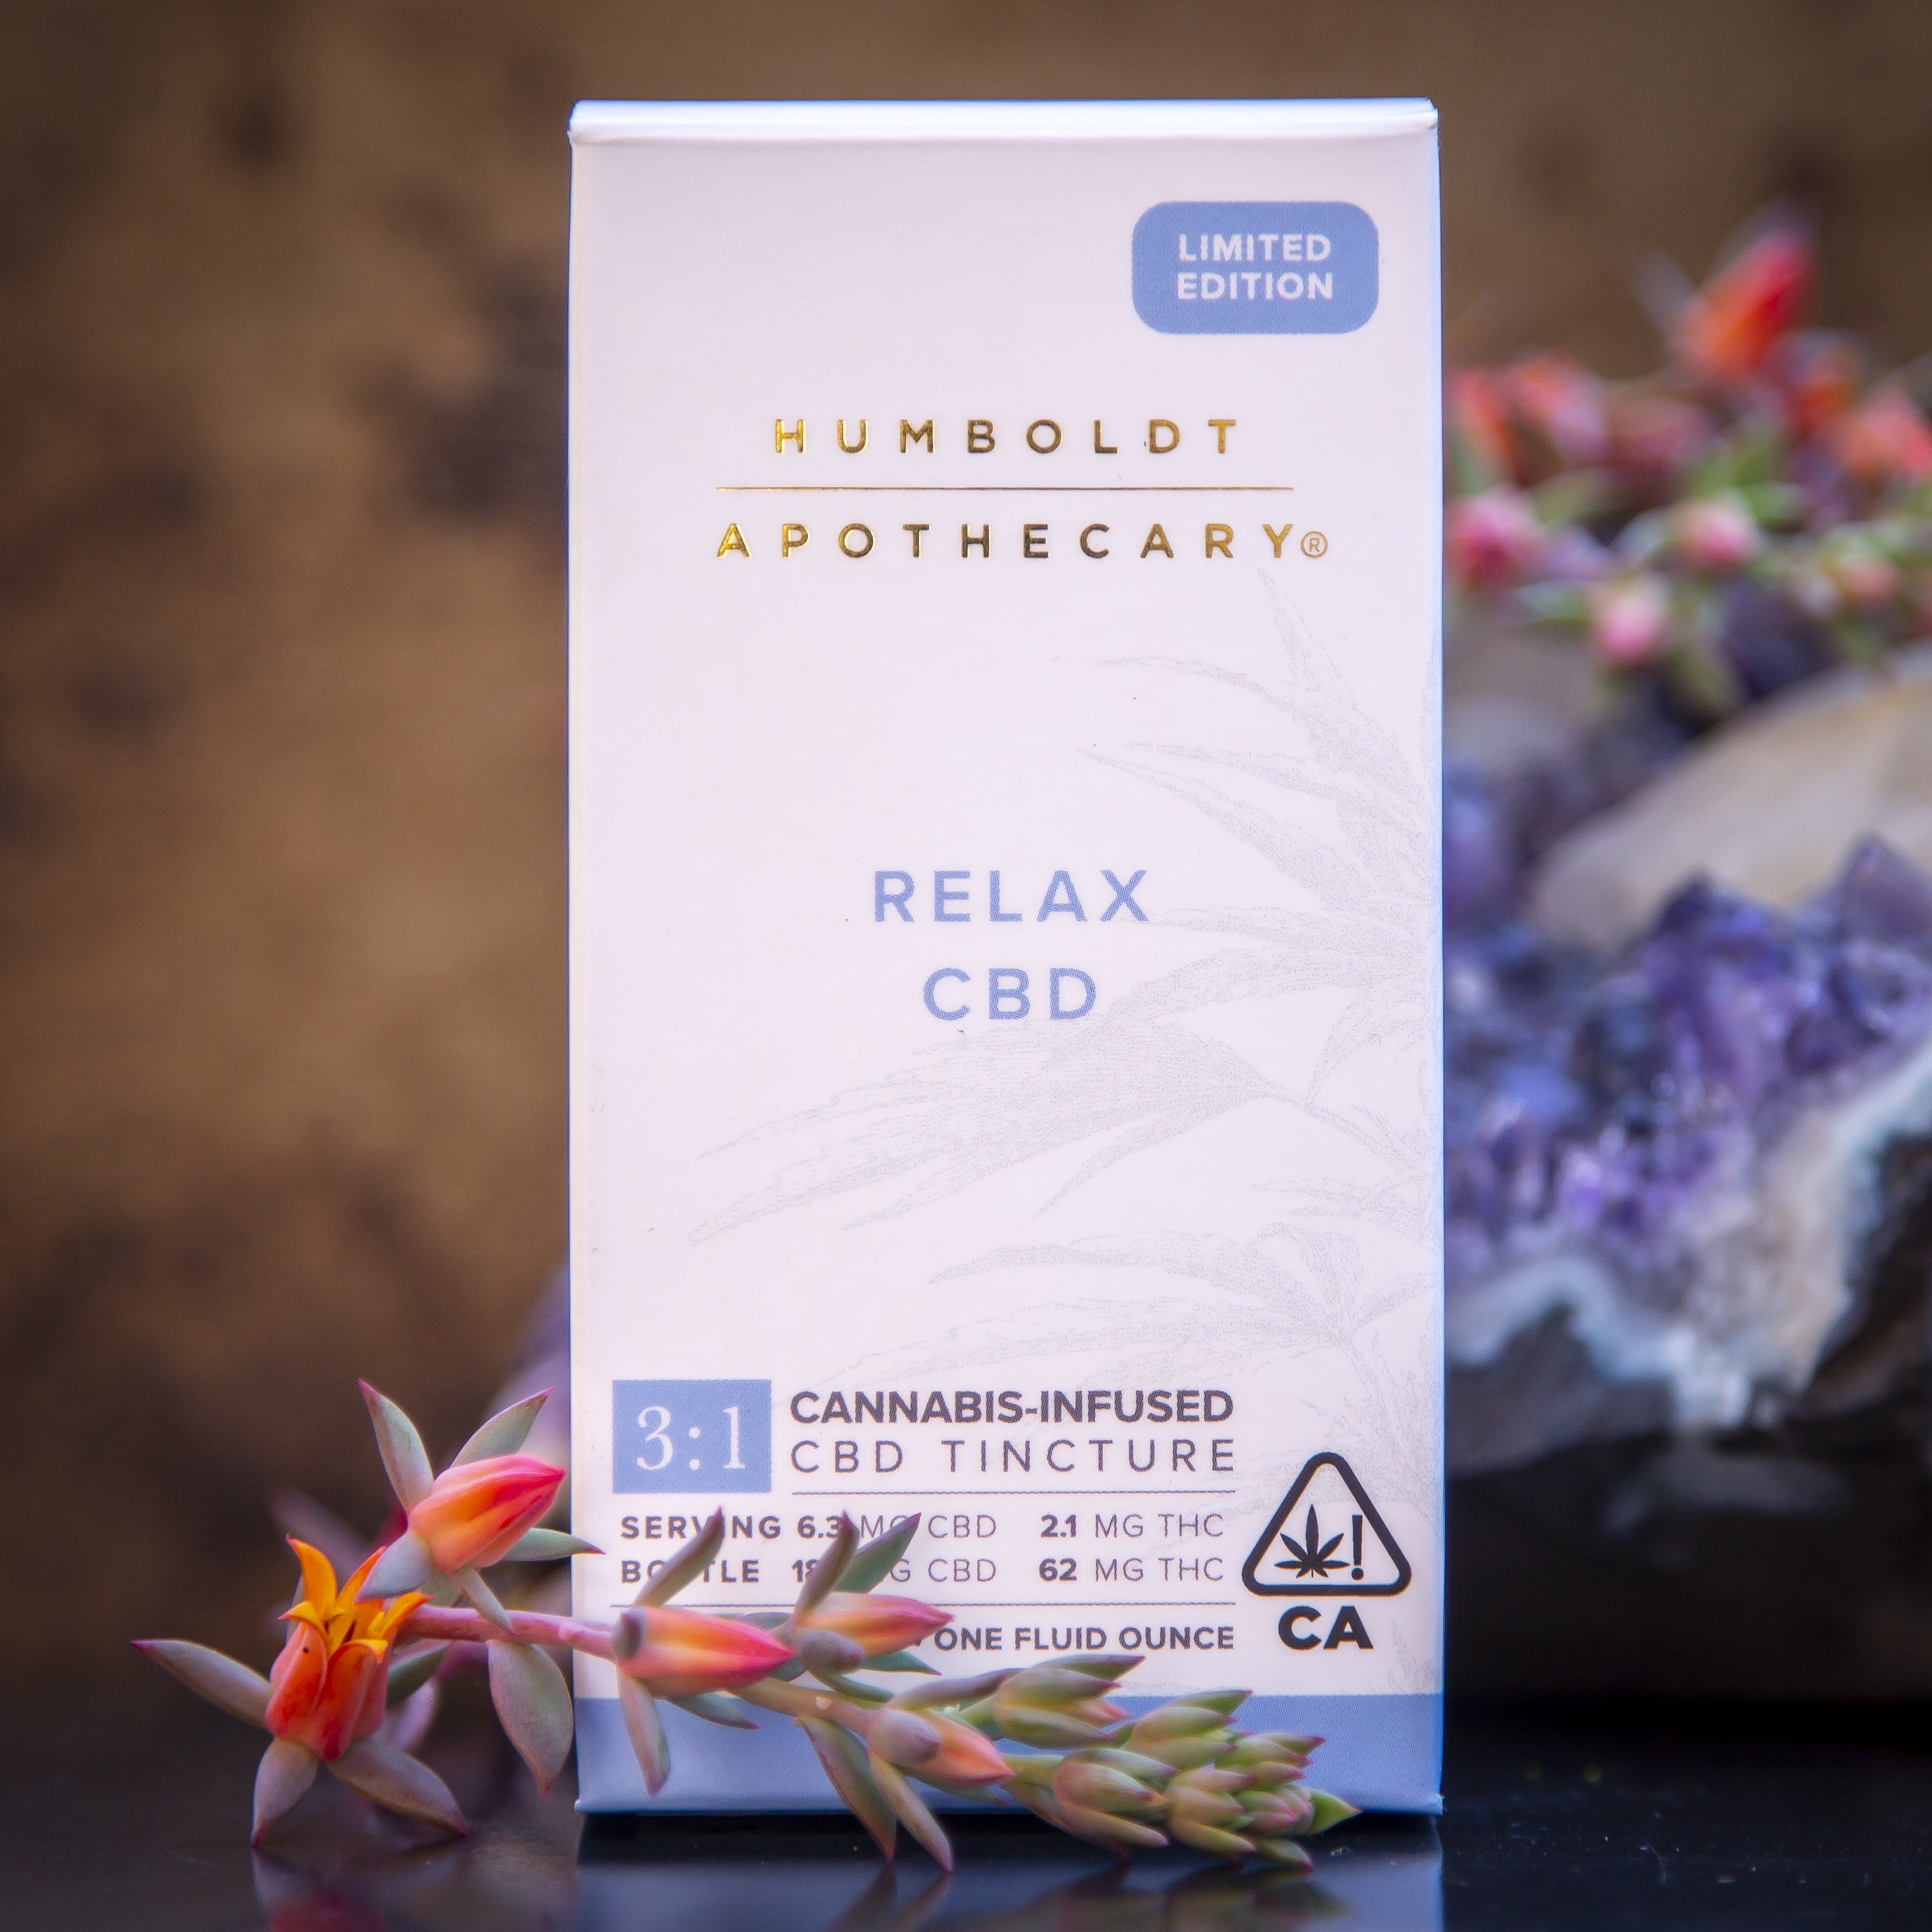 Relax CBD by Humboldt Apothecary